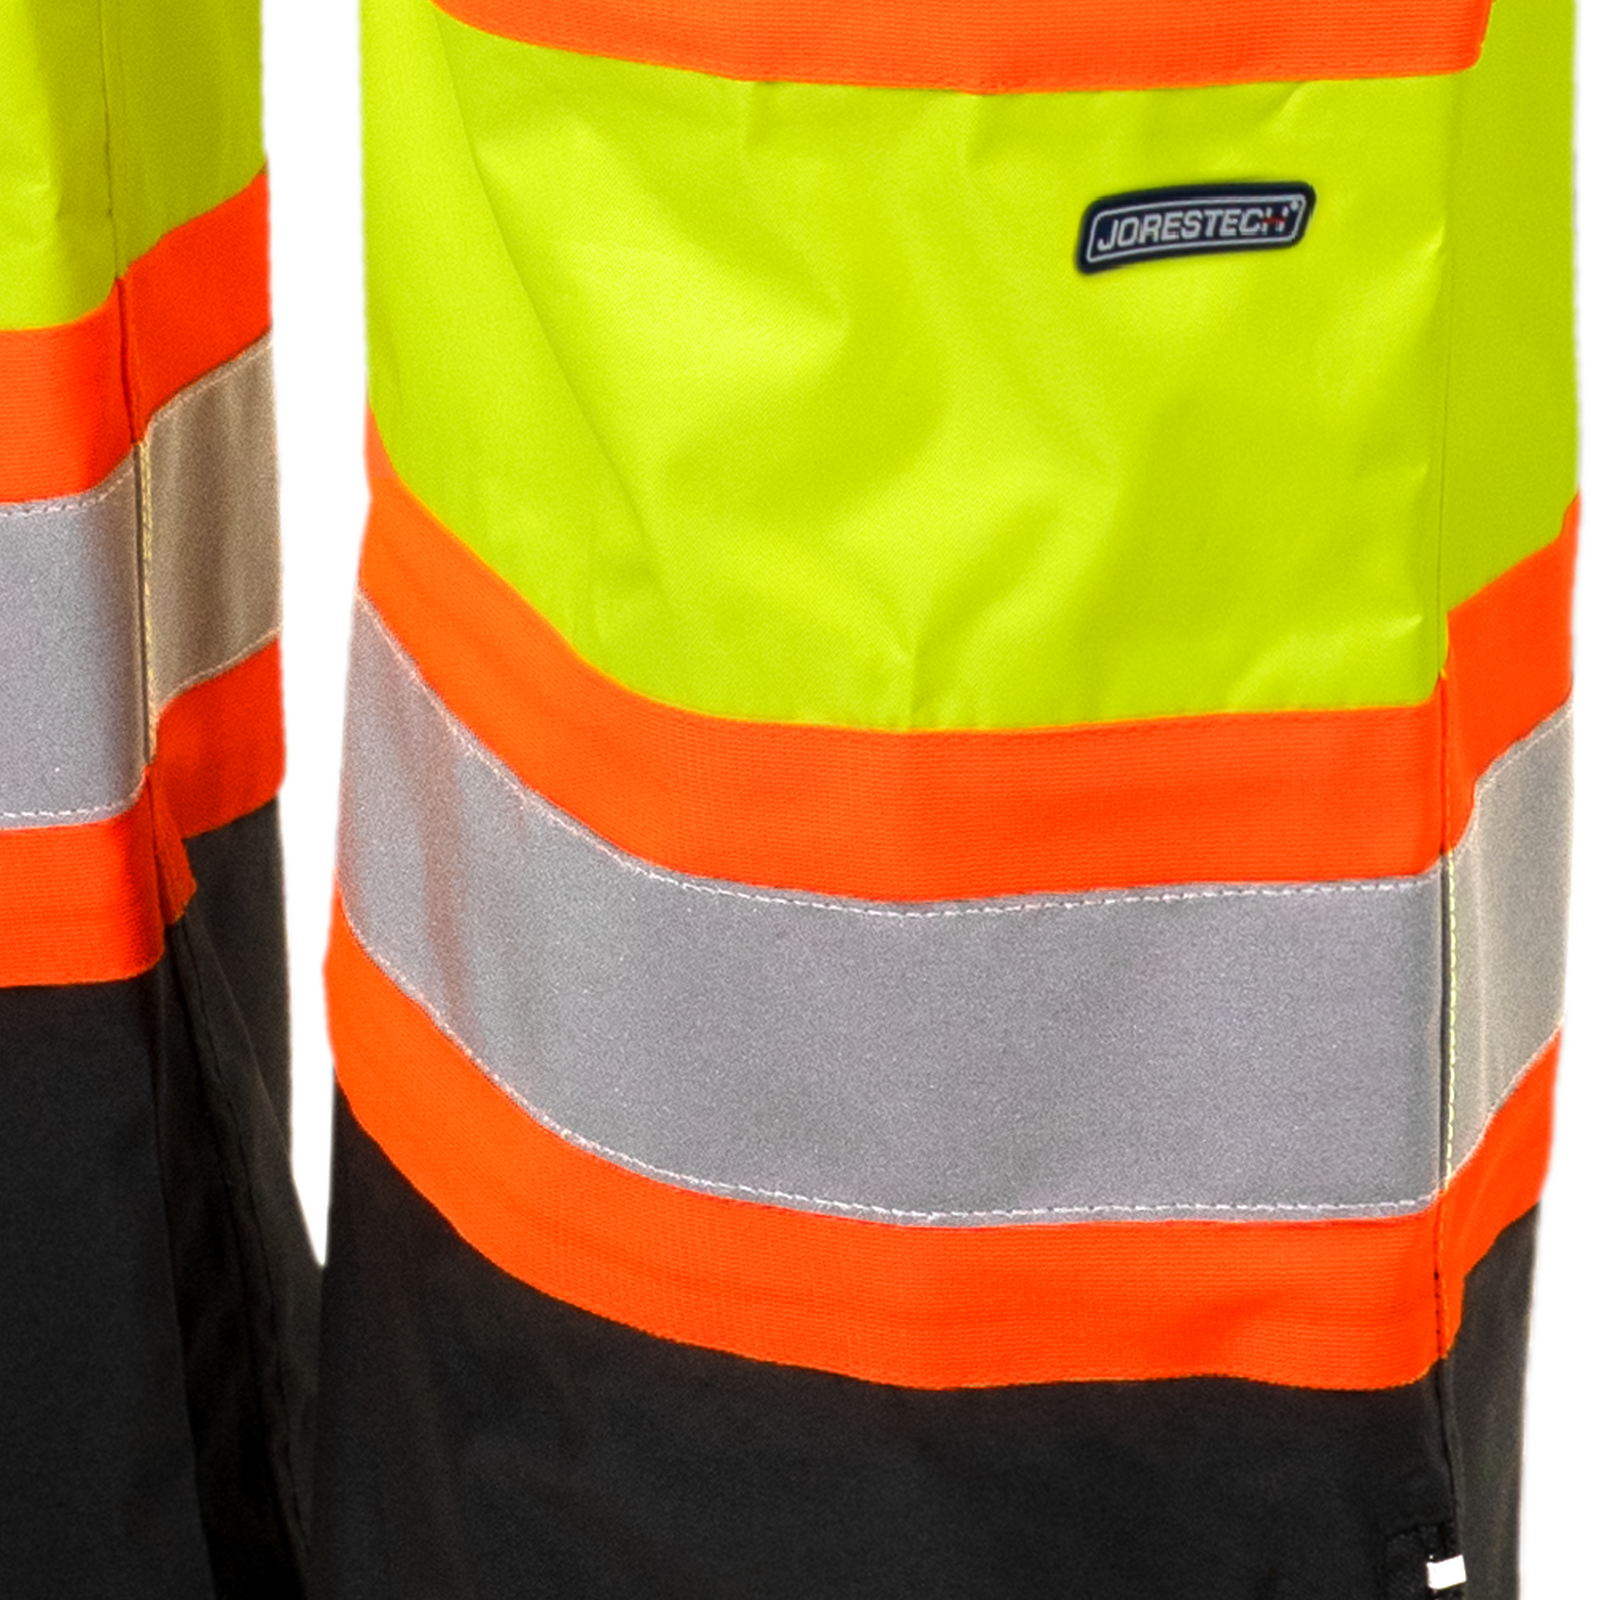 Closeup of the yellow safety rain pants with reflective stripes, contrasting orange lines and dirt concealing black fabric